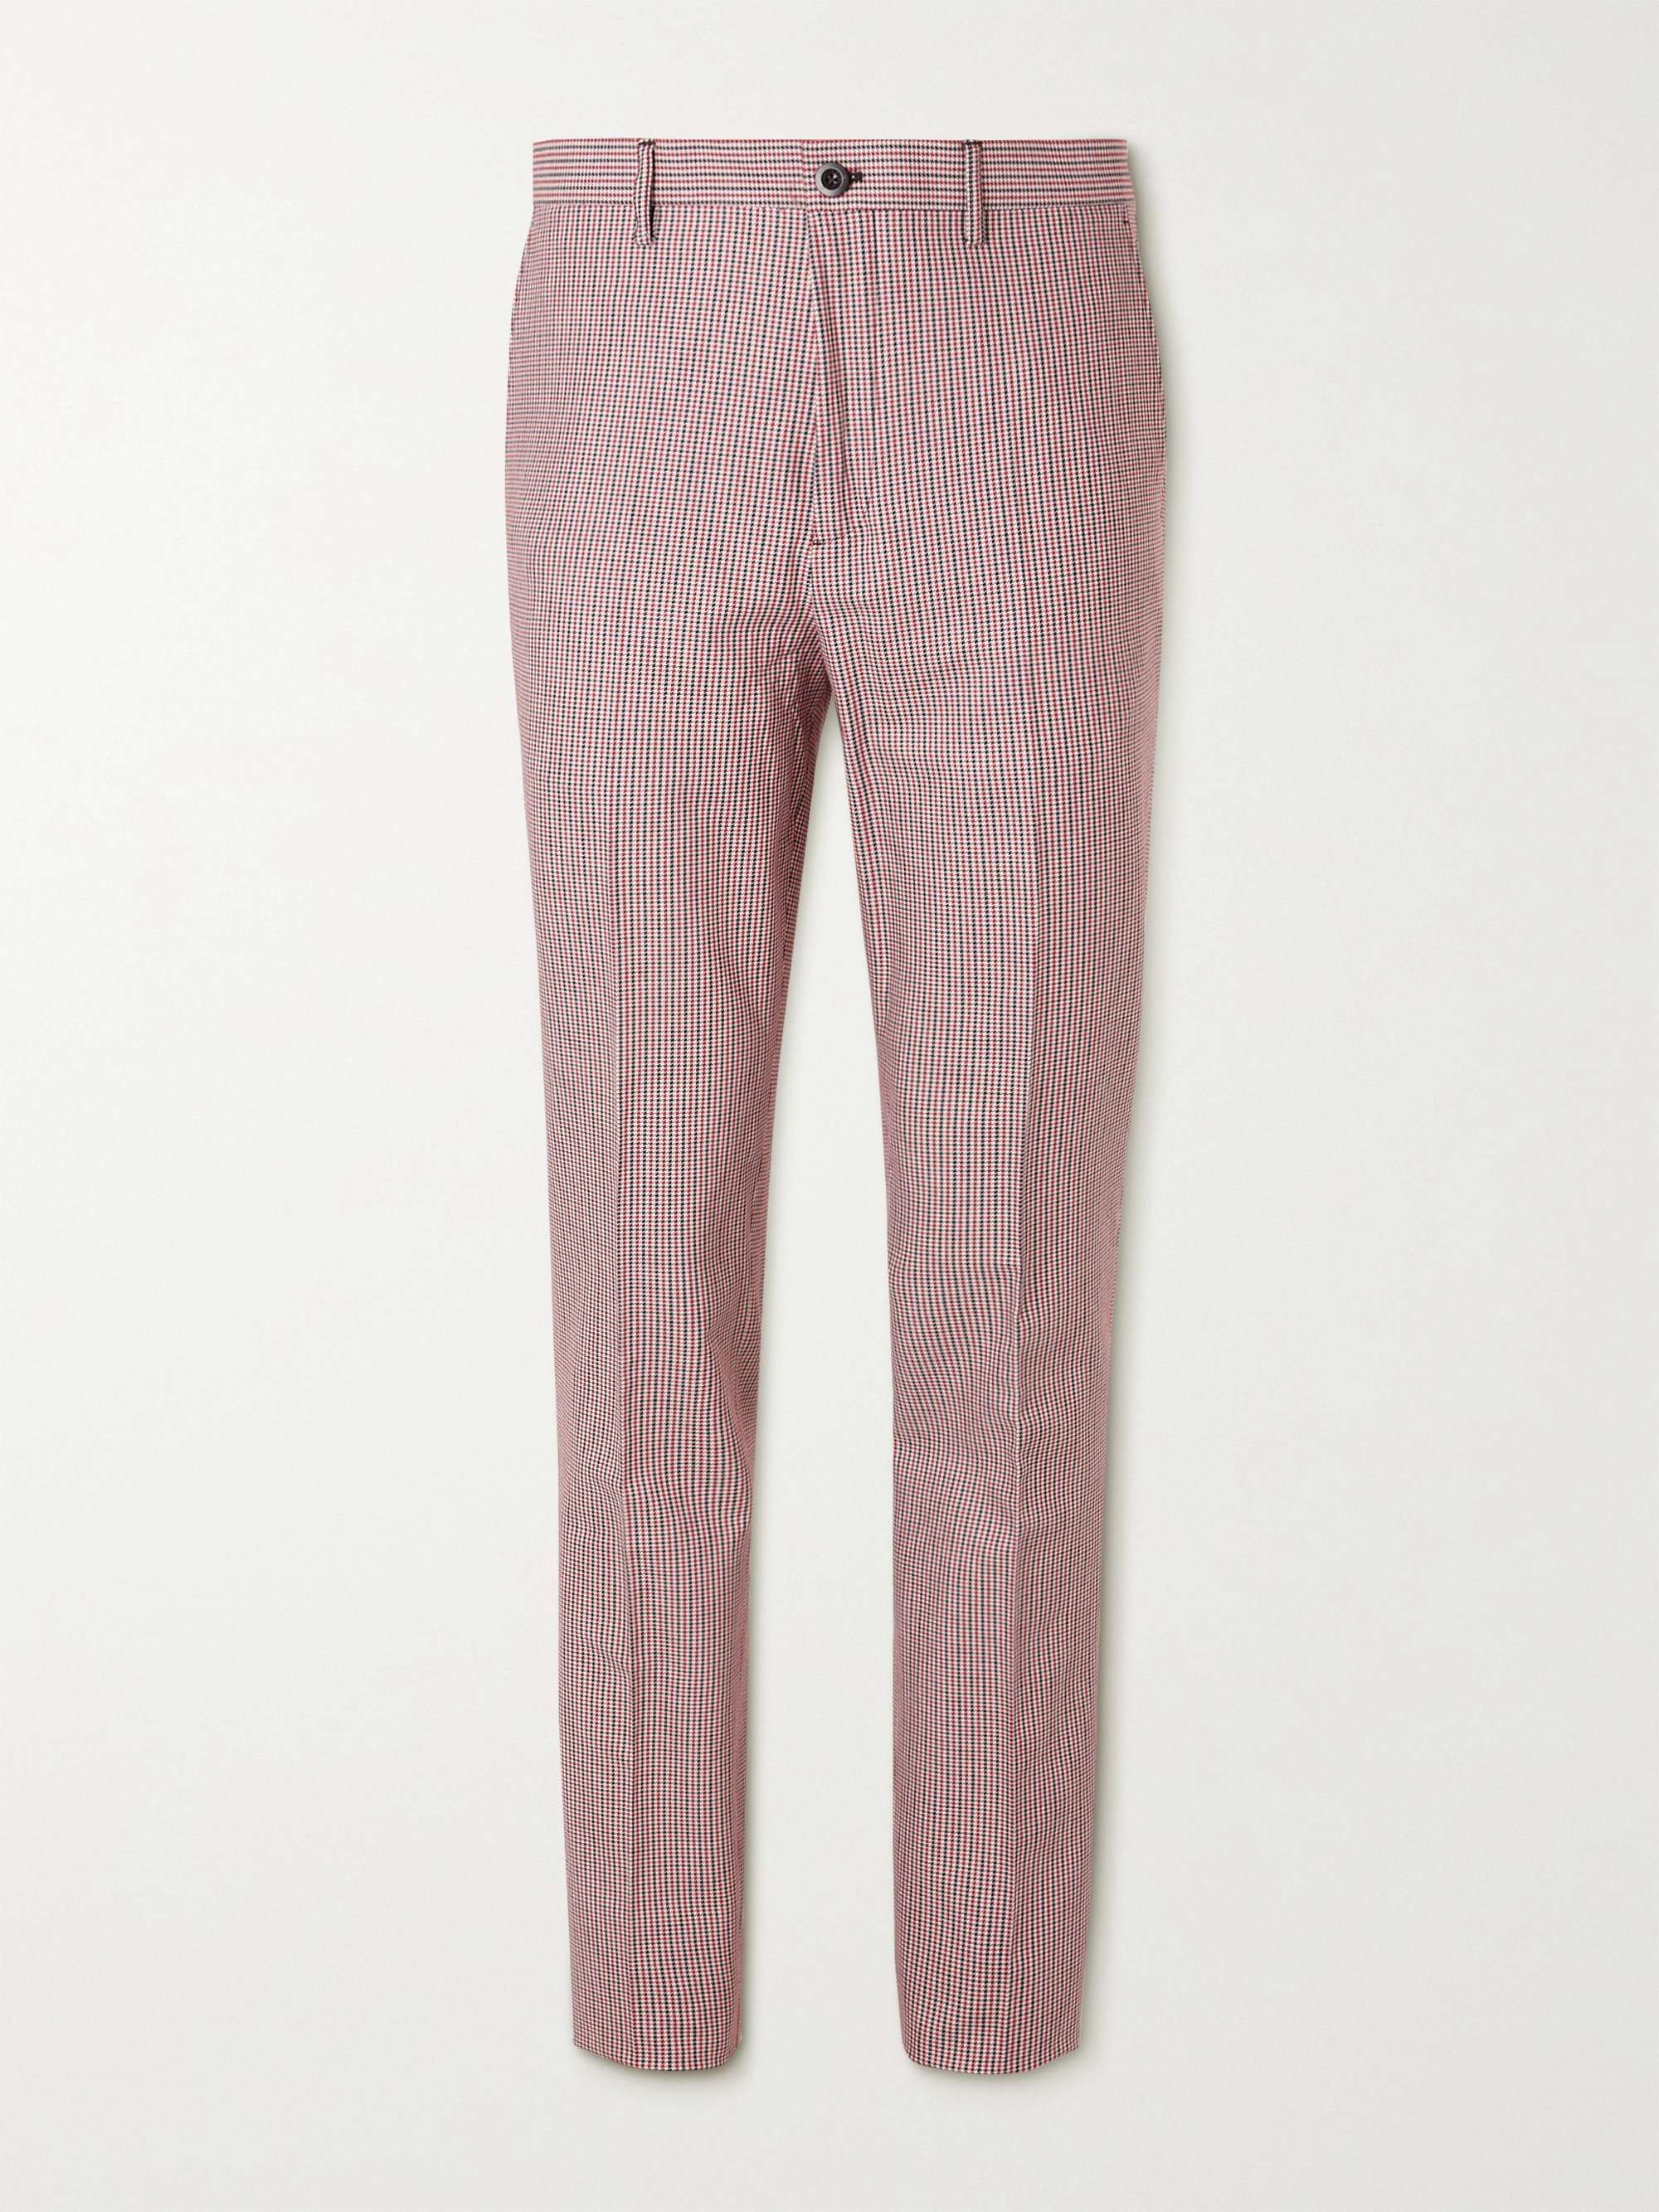 MR P. Tapered Puppytooth Stretch-Cotton Golf Trousers for Men | MR PORTER